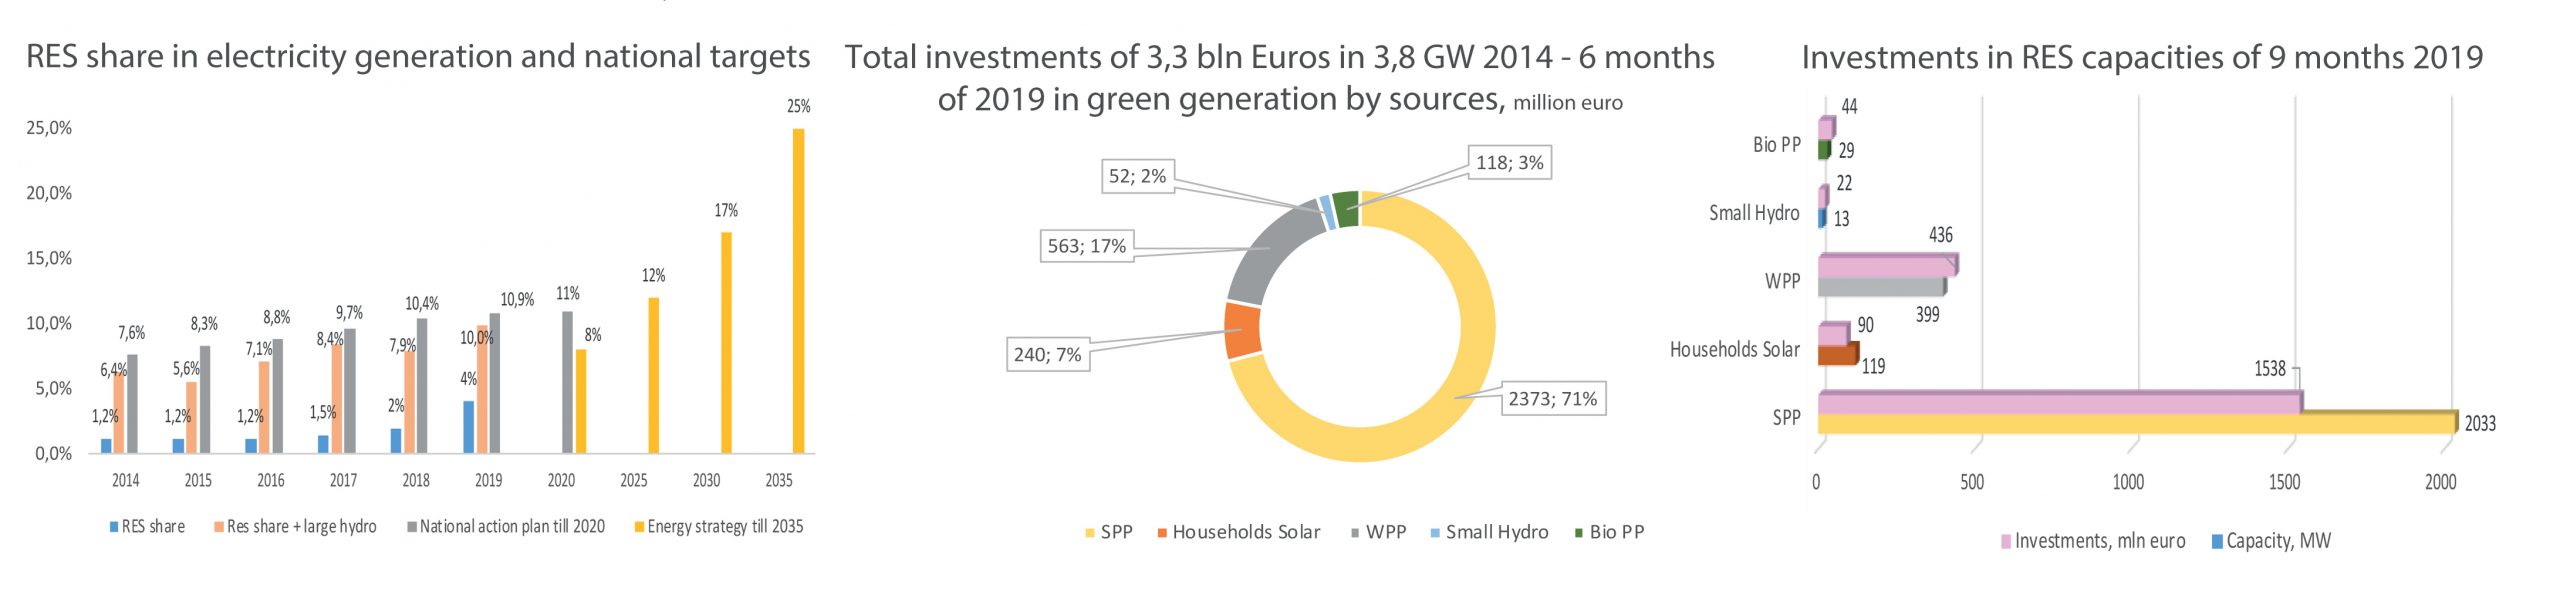 Fig. 3. RES share (actual and planned), the volume of investment in RES as of 1st half of 2019 compared to 2014 and total investments in RES for 9 months of 2019 by sectors. Source: European-Ukrainian Energy Agency (EUEA), Renewable Energy & Energy Efficiency Development in Ukraine report, Nov. 2019, Kyiv.